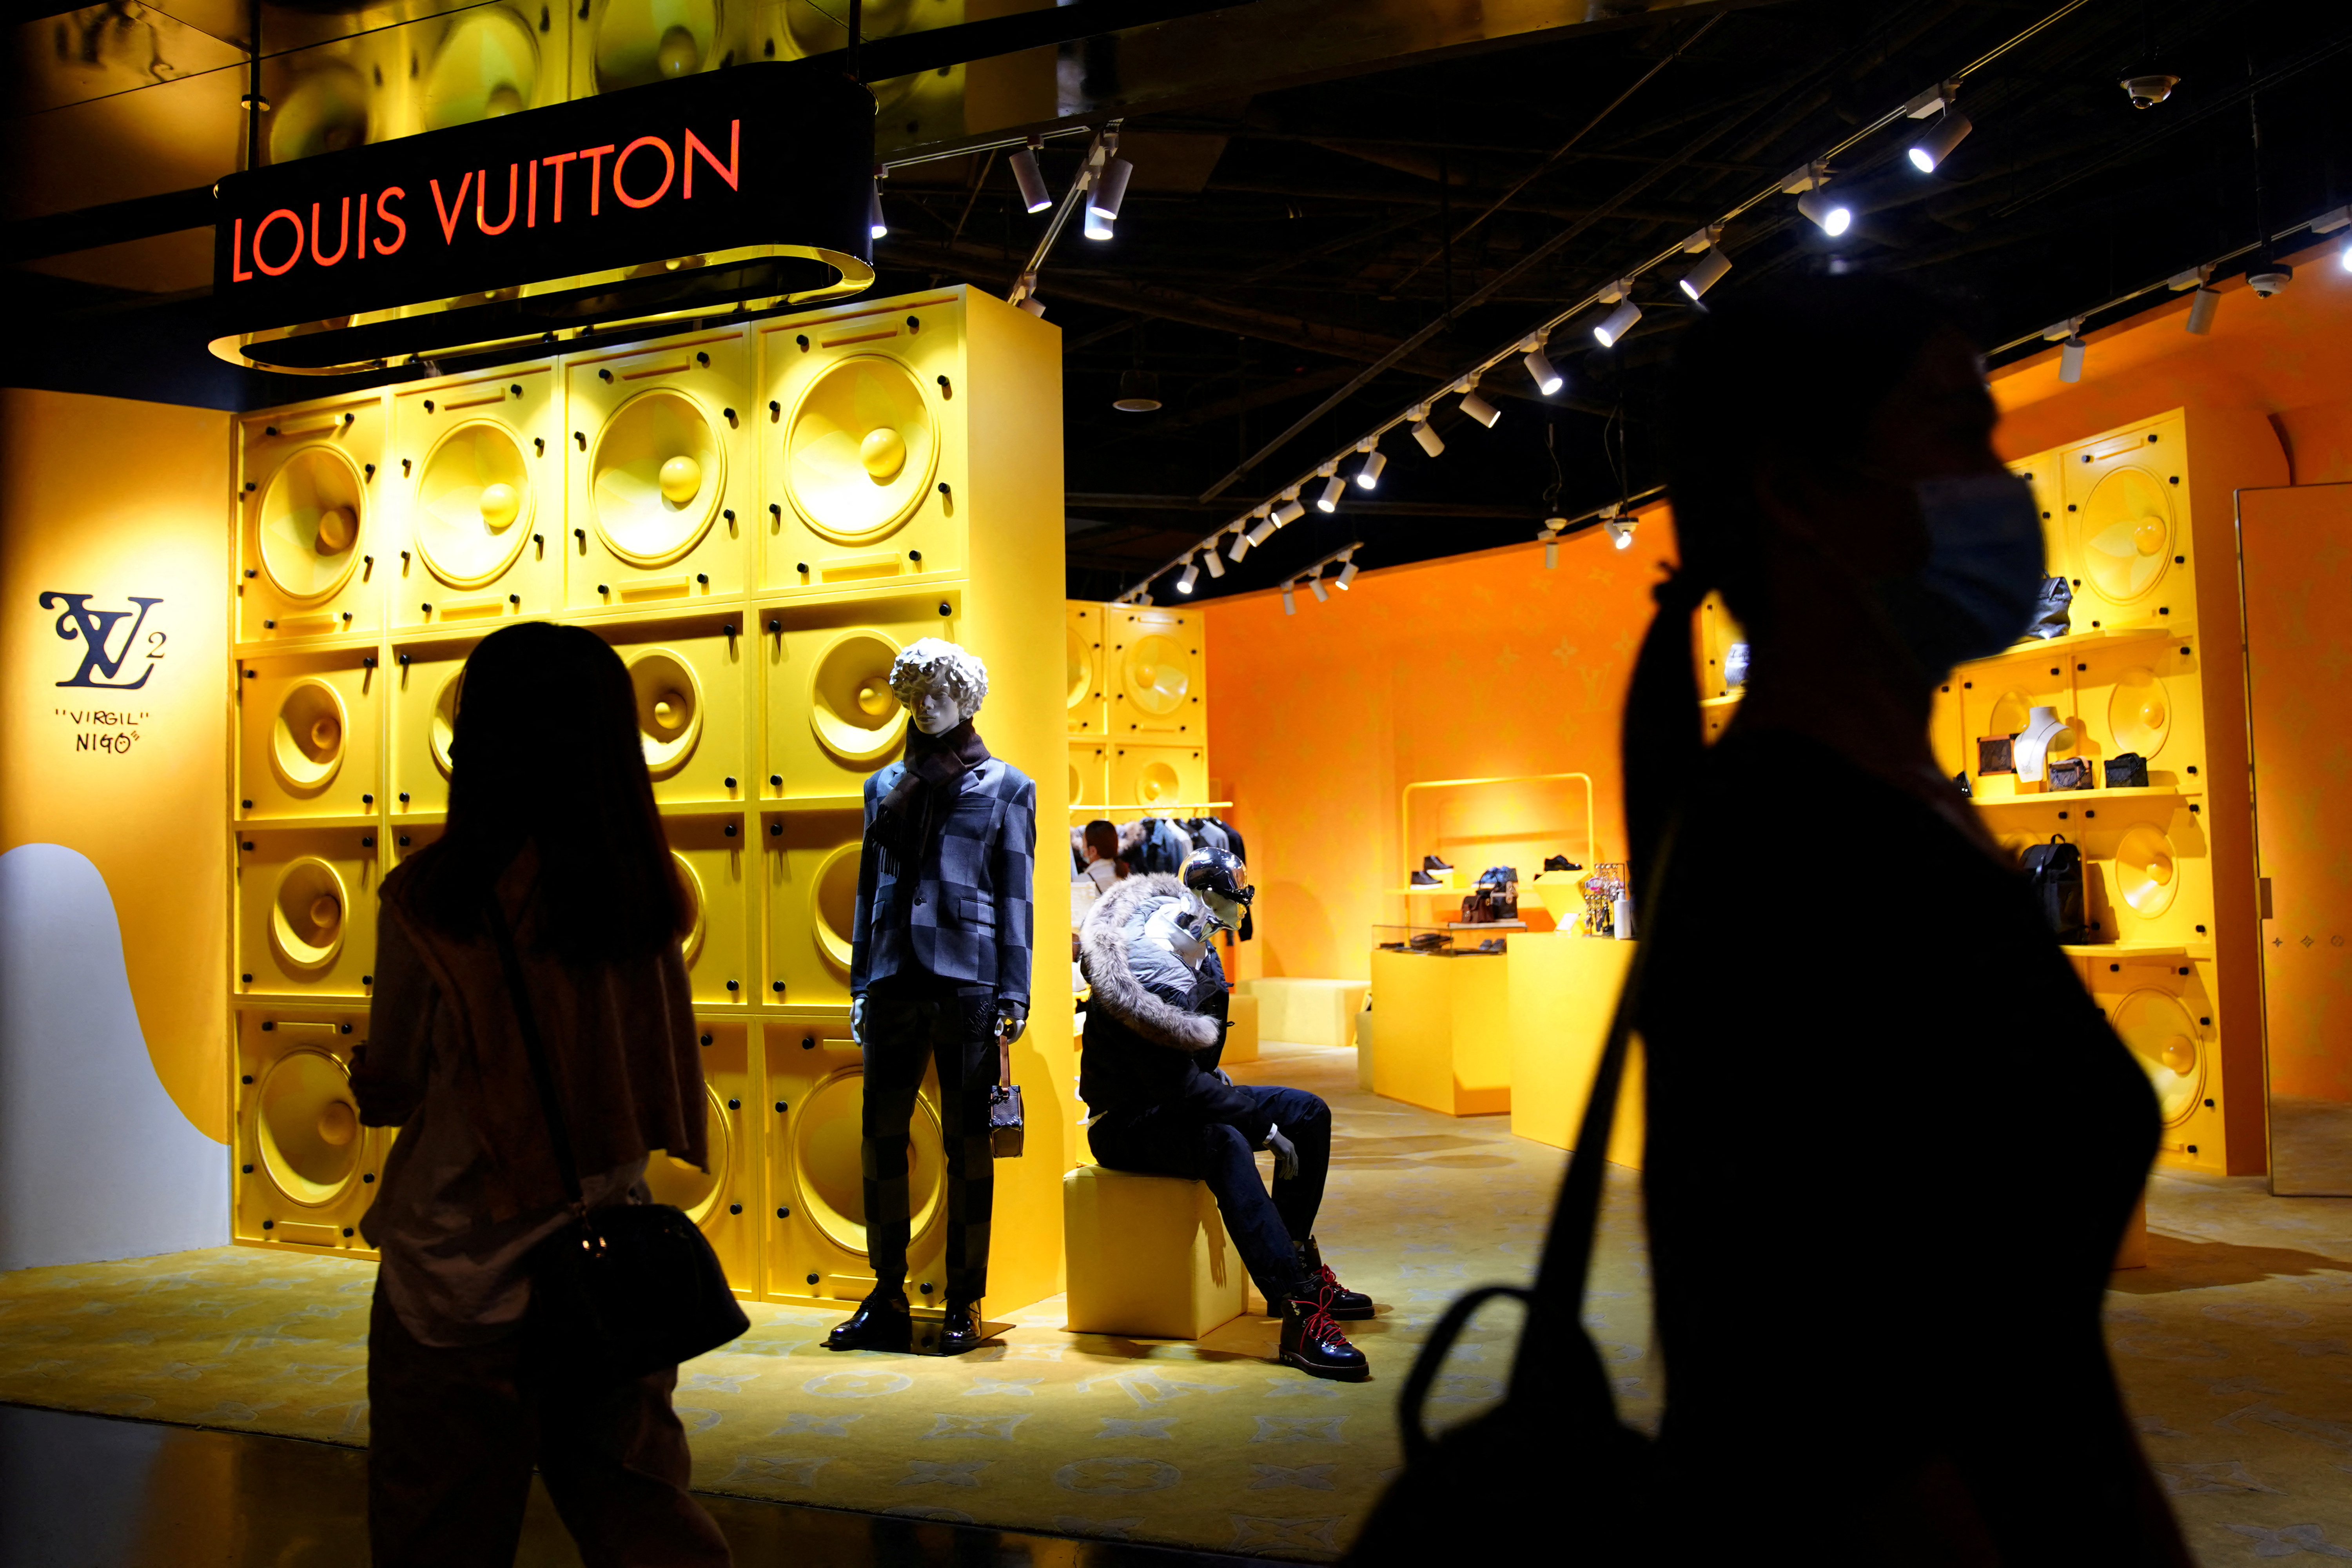 LVMH Stock Rating: COVID-19 Stymied This Luxury Brand